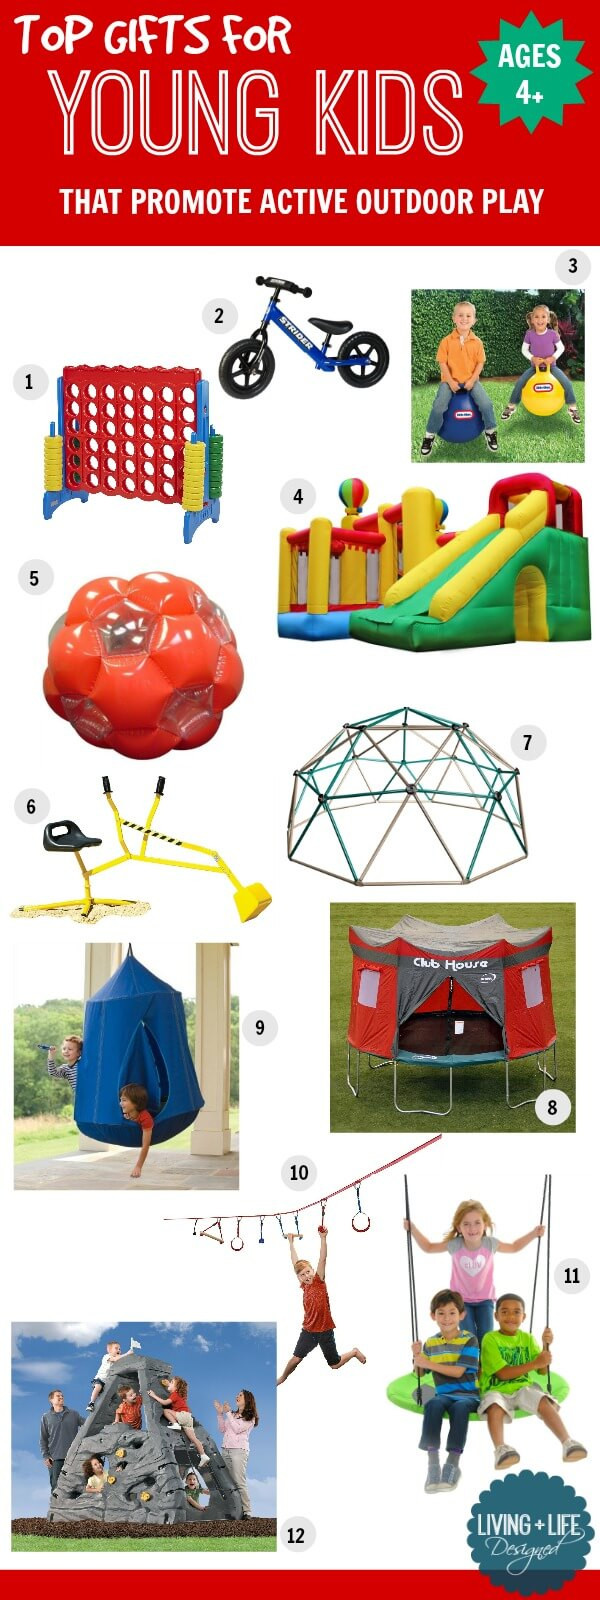 Best Outdoor Gifts For Kids
 Gift Ideas for Young Kids Ages 4 That Promote Active